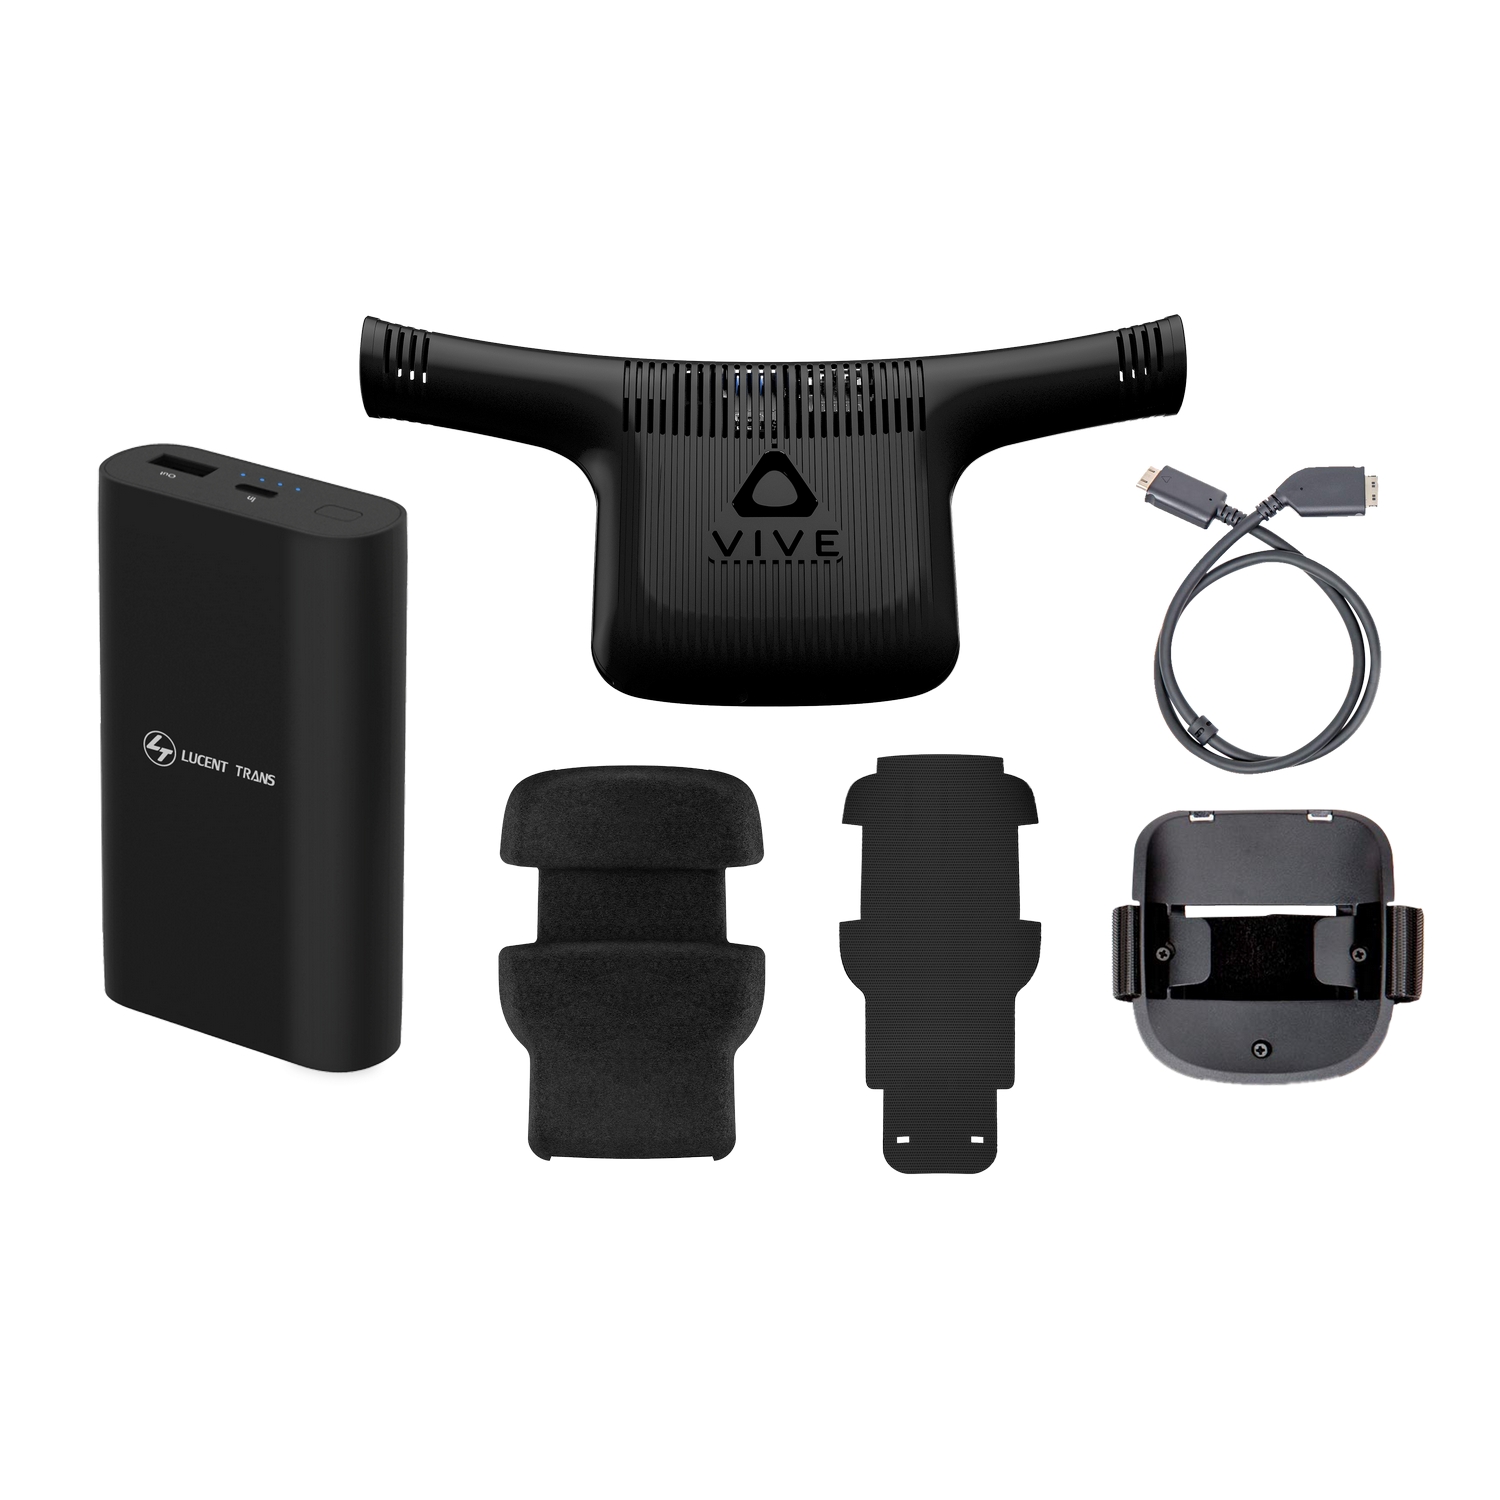 HTC Vive - HTC VIVE COSMOS Wireless VR Headset Bundle - Cosmos Headset, Wireless Adapter and Wireless Adapter A